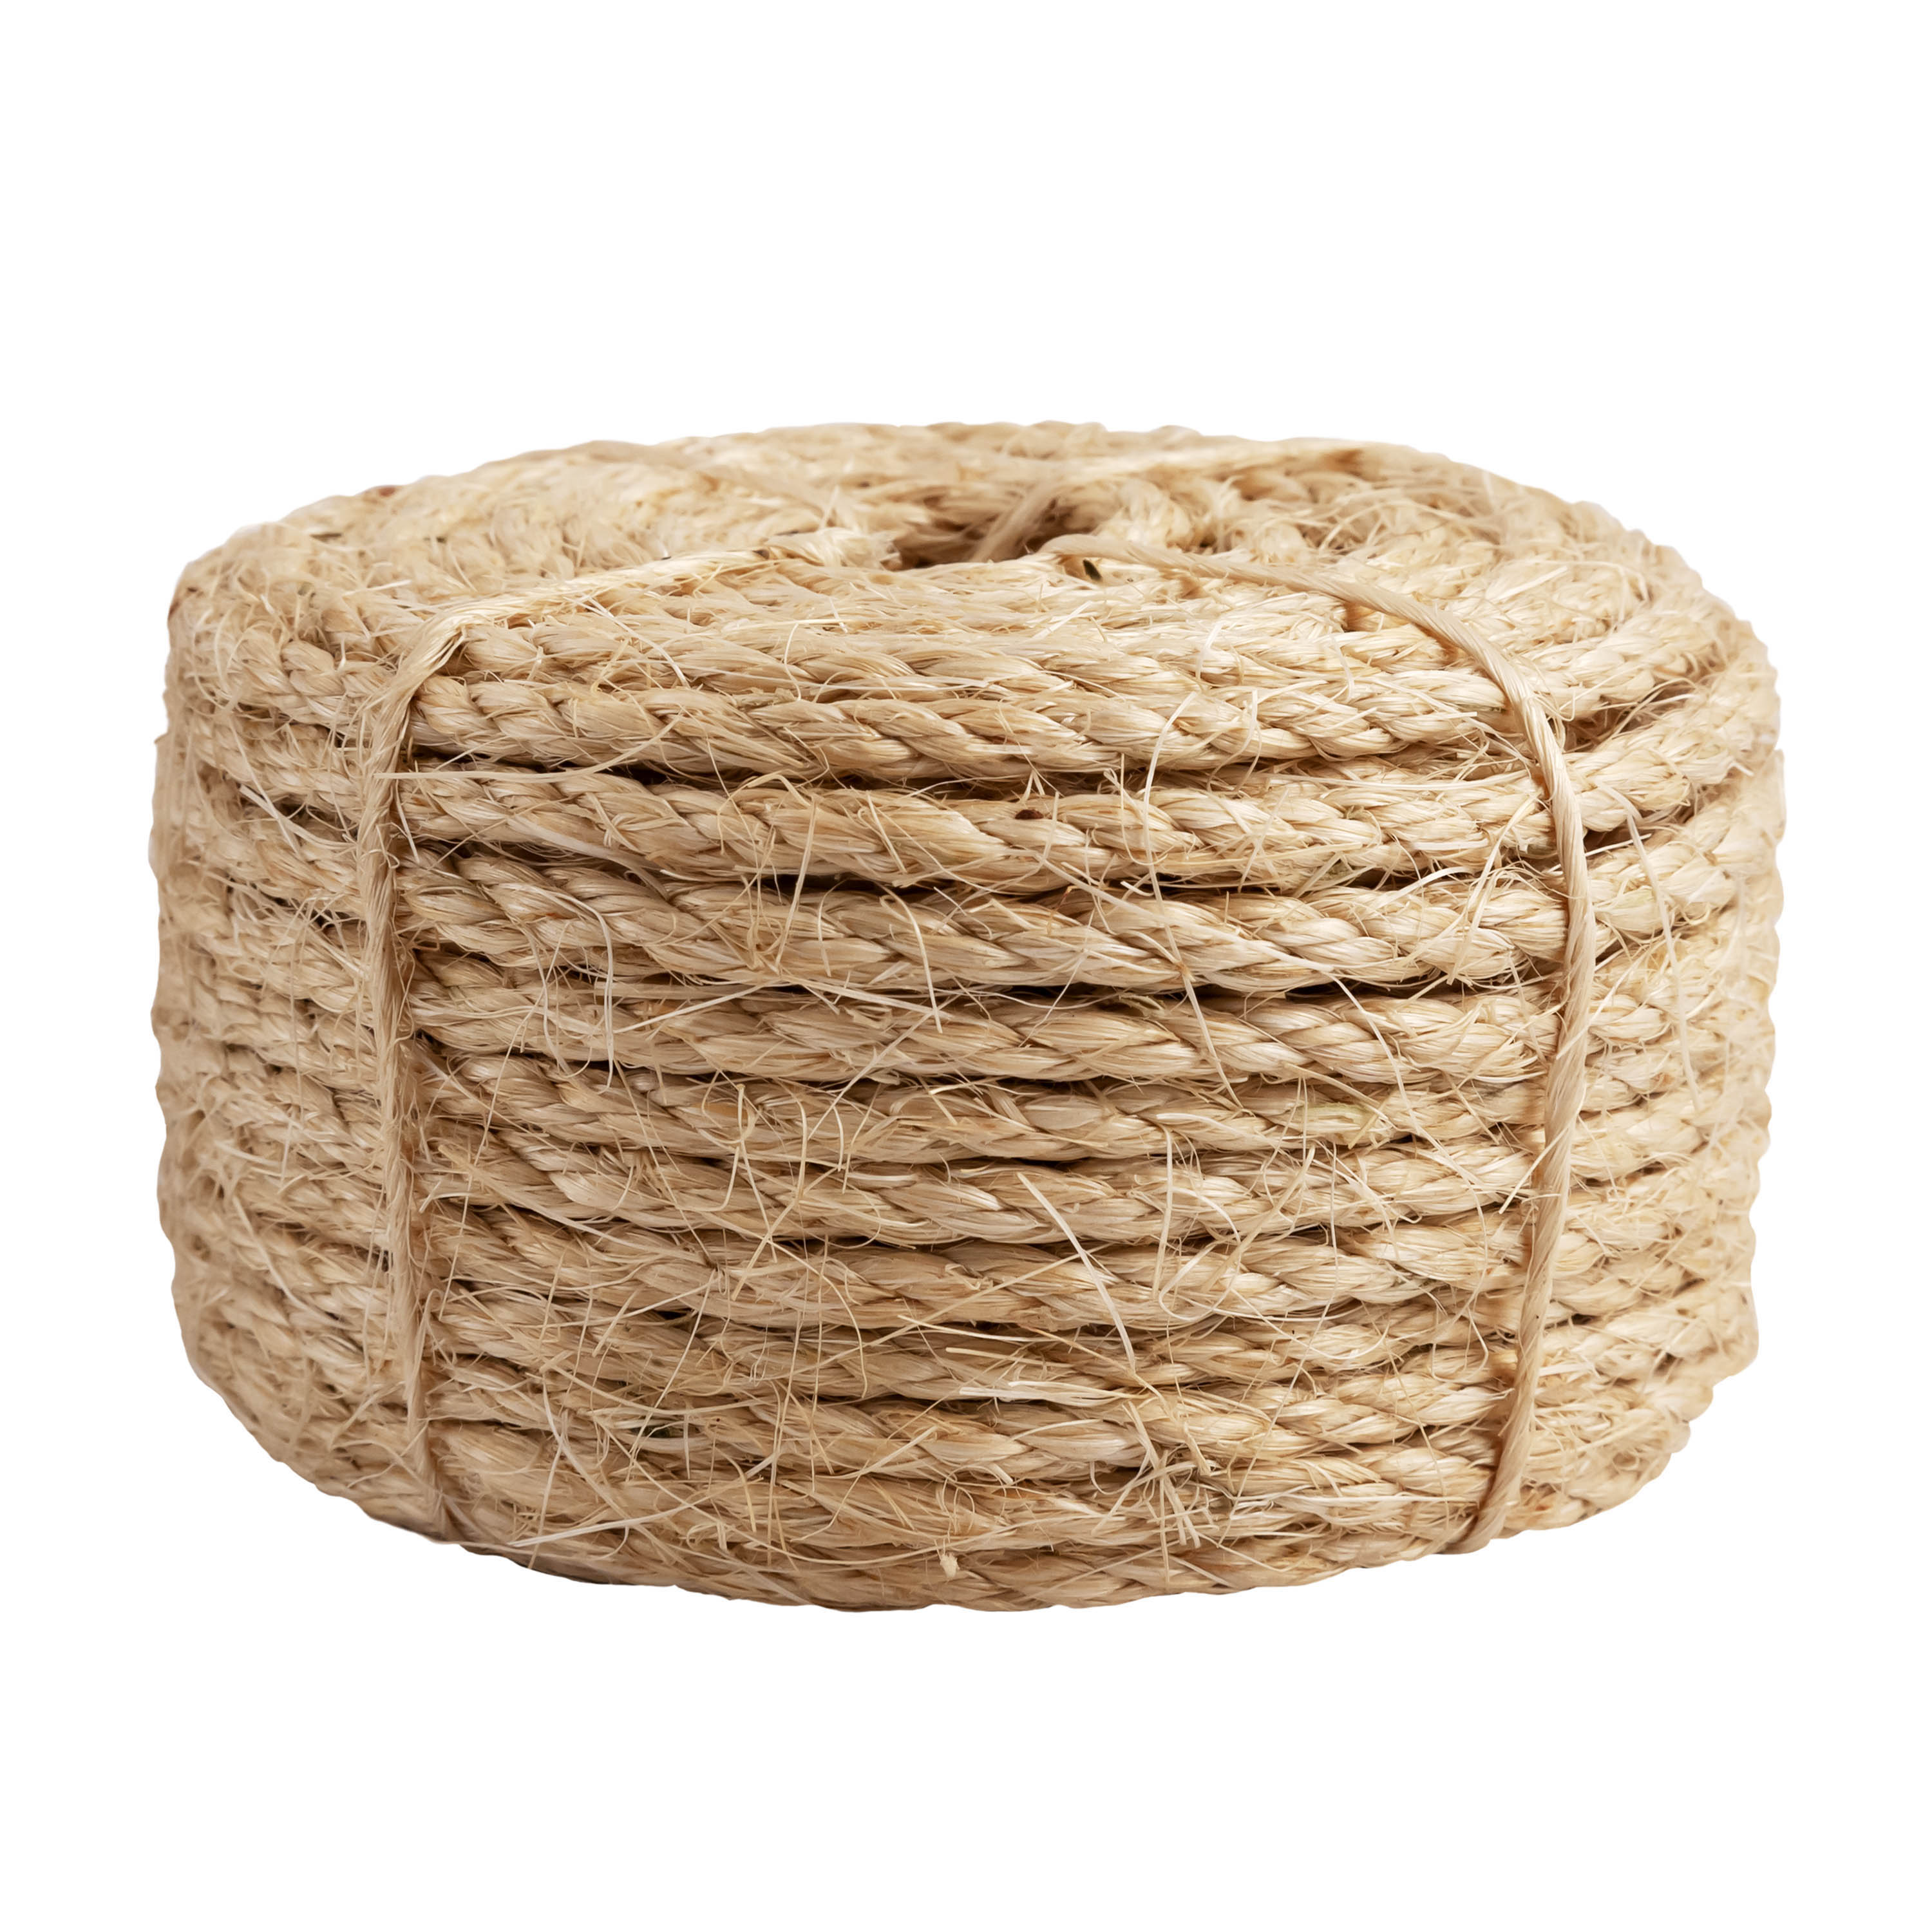 Hyper Tough 1/4" x 100' Sisal Twisted Rope, Beige - image 4 of 6